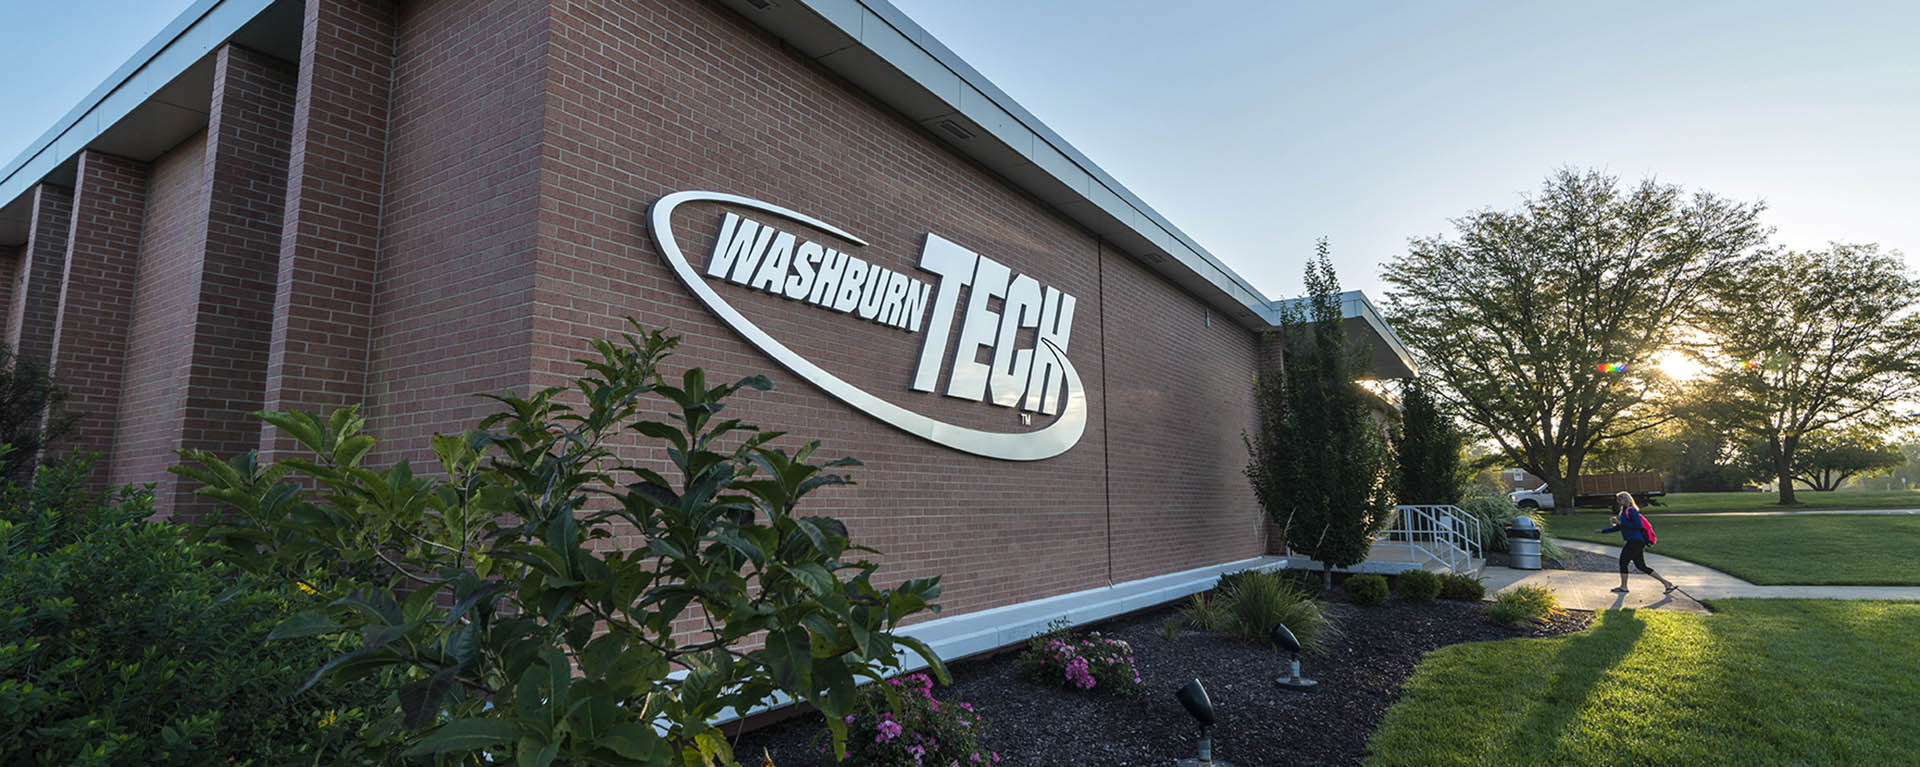 Two sign poles with Washburn Tech banners outside a building.